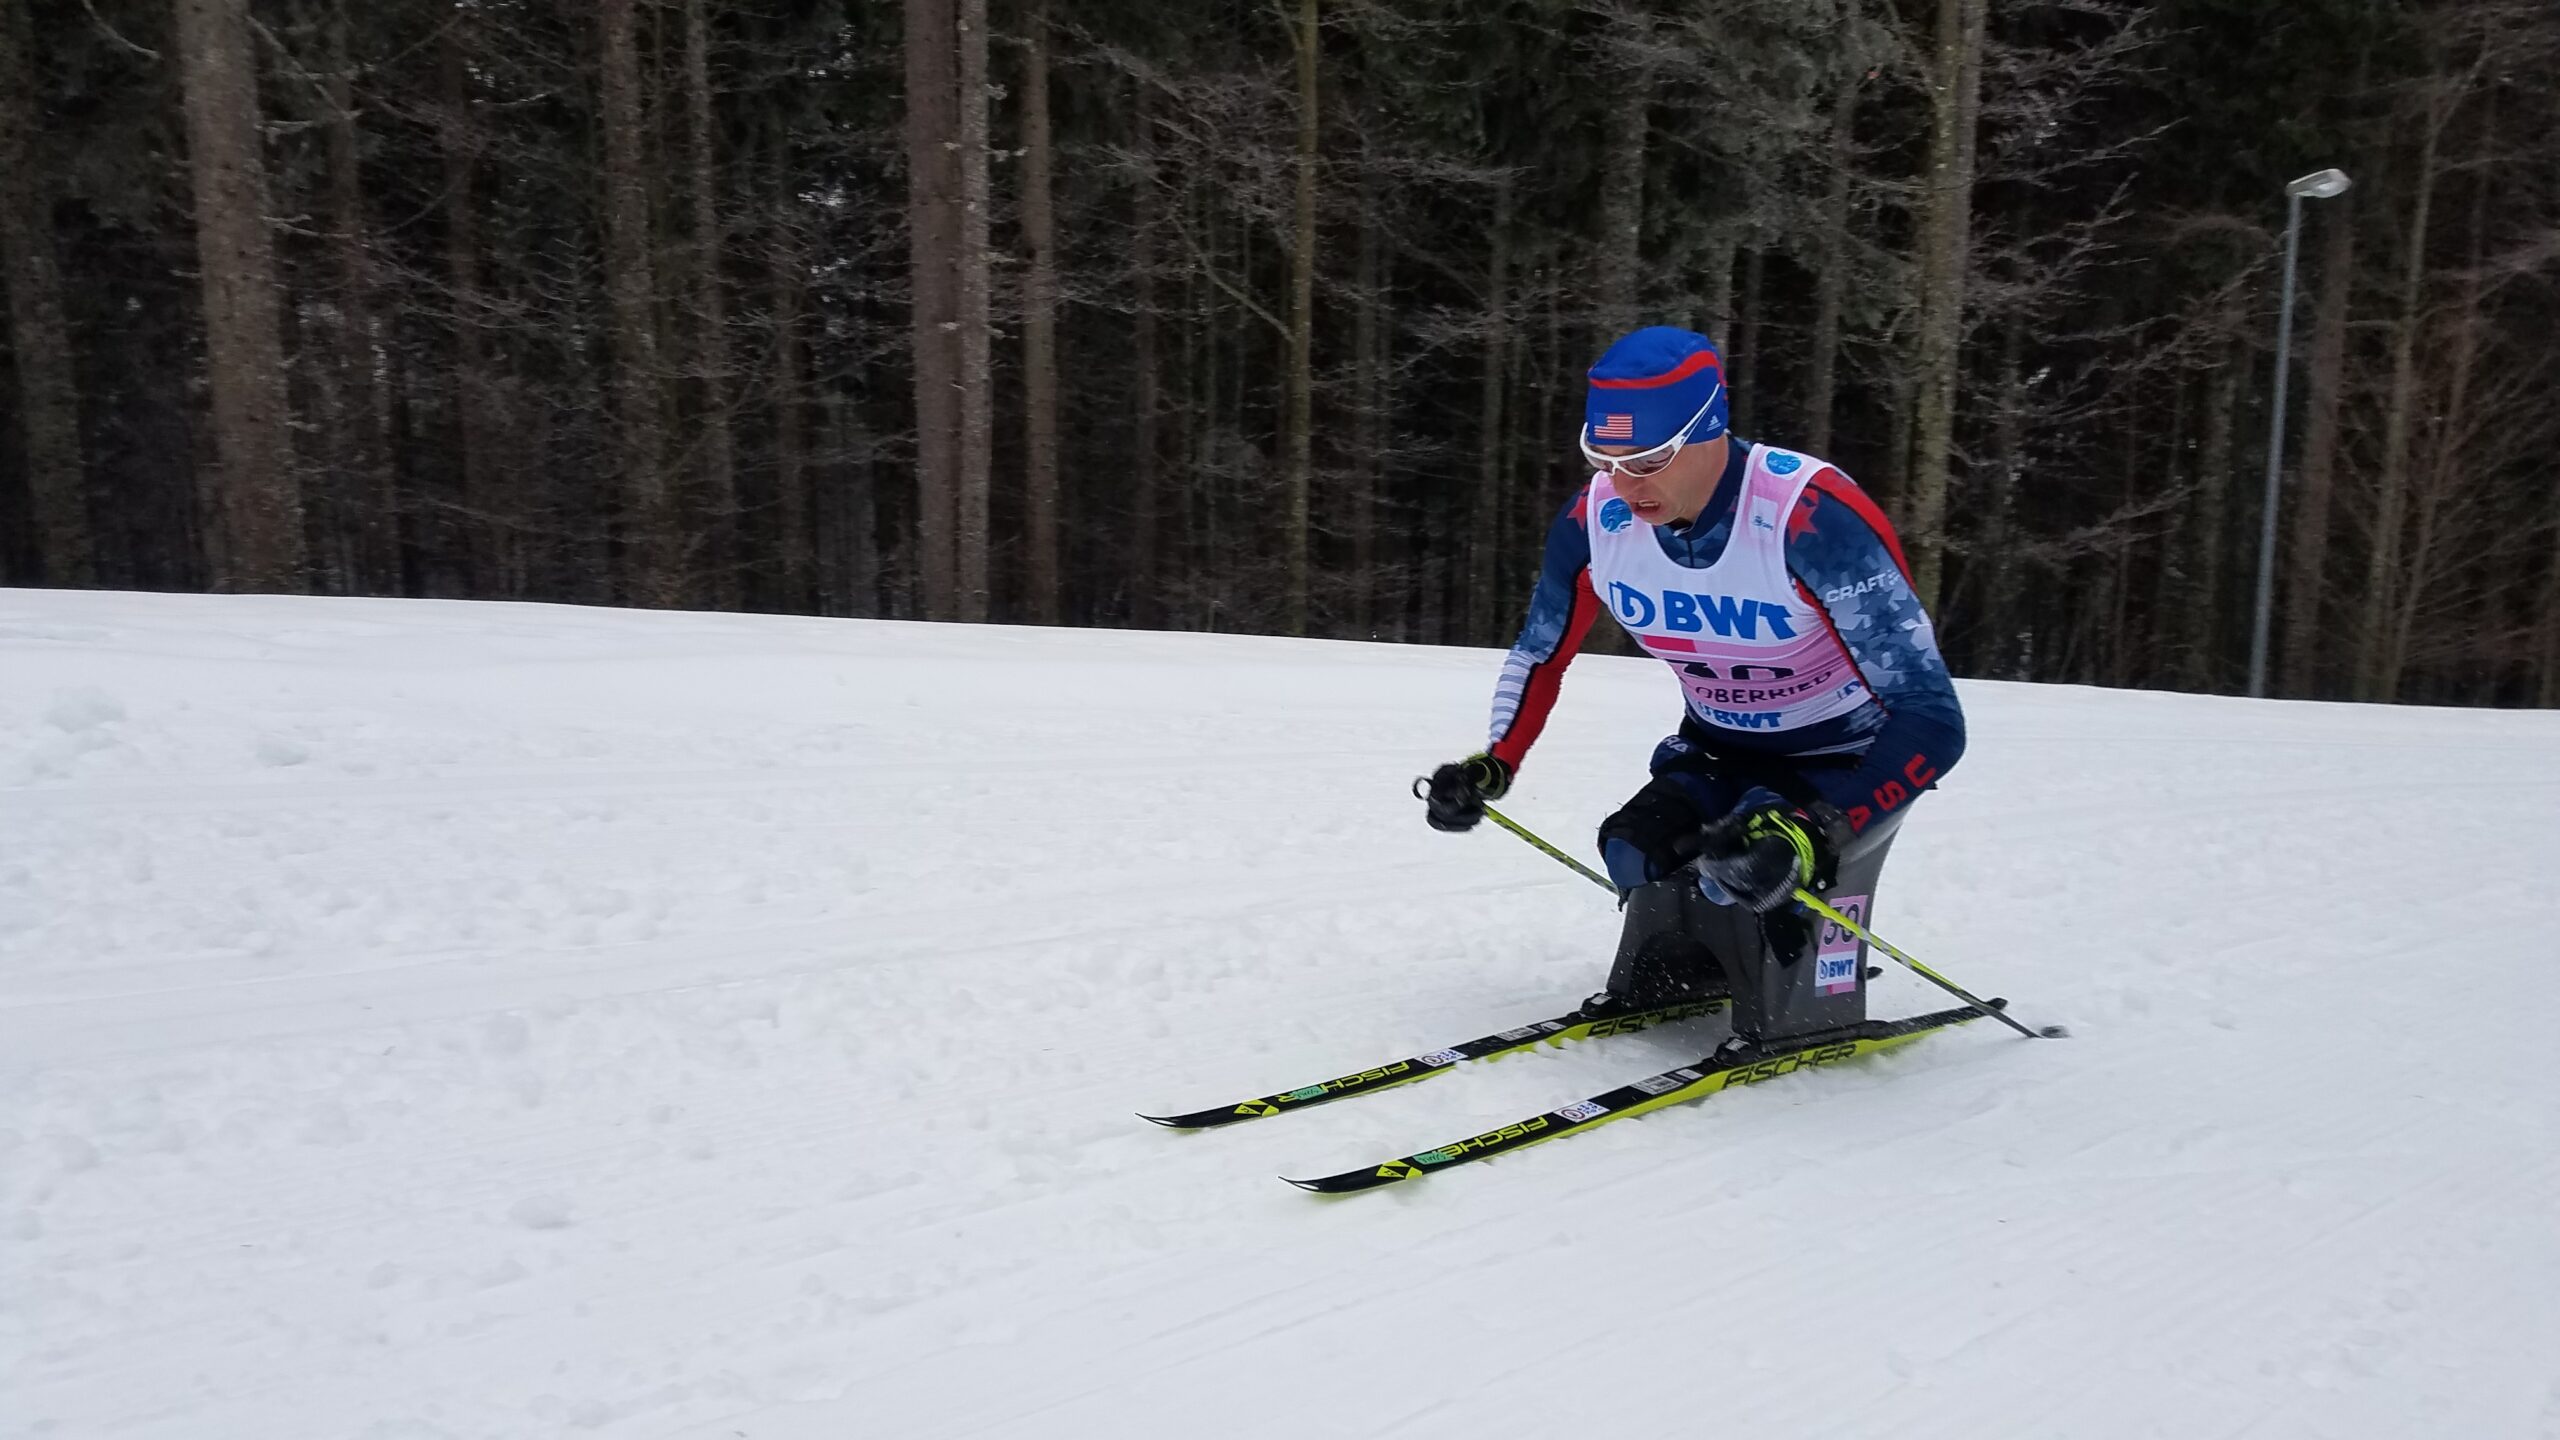 It took carbon fiber—and spy work—to get Paralympic skiers better gear